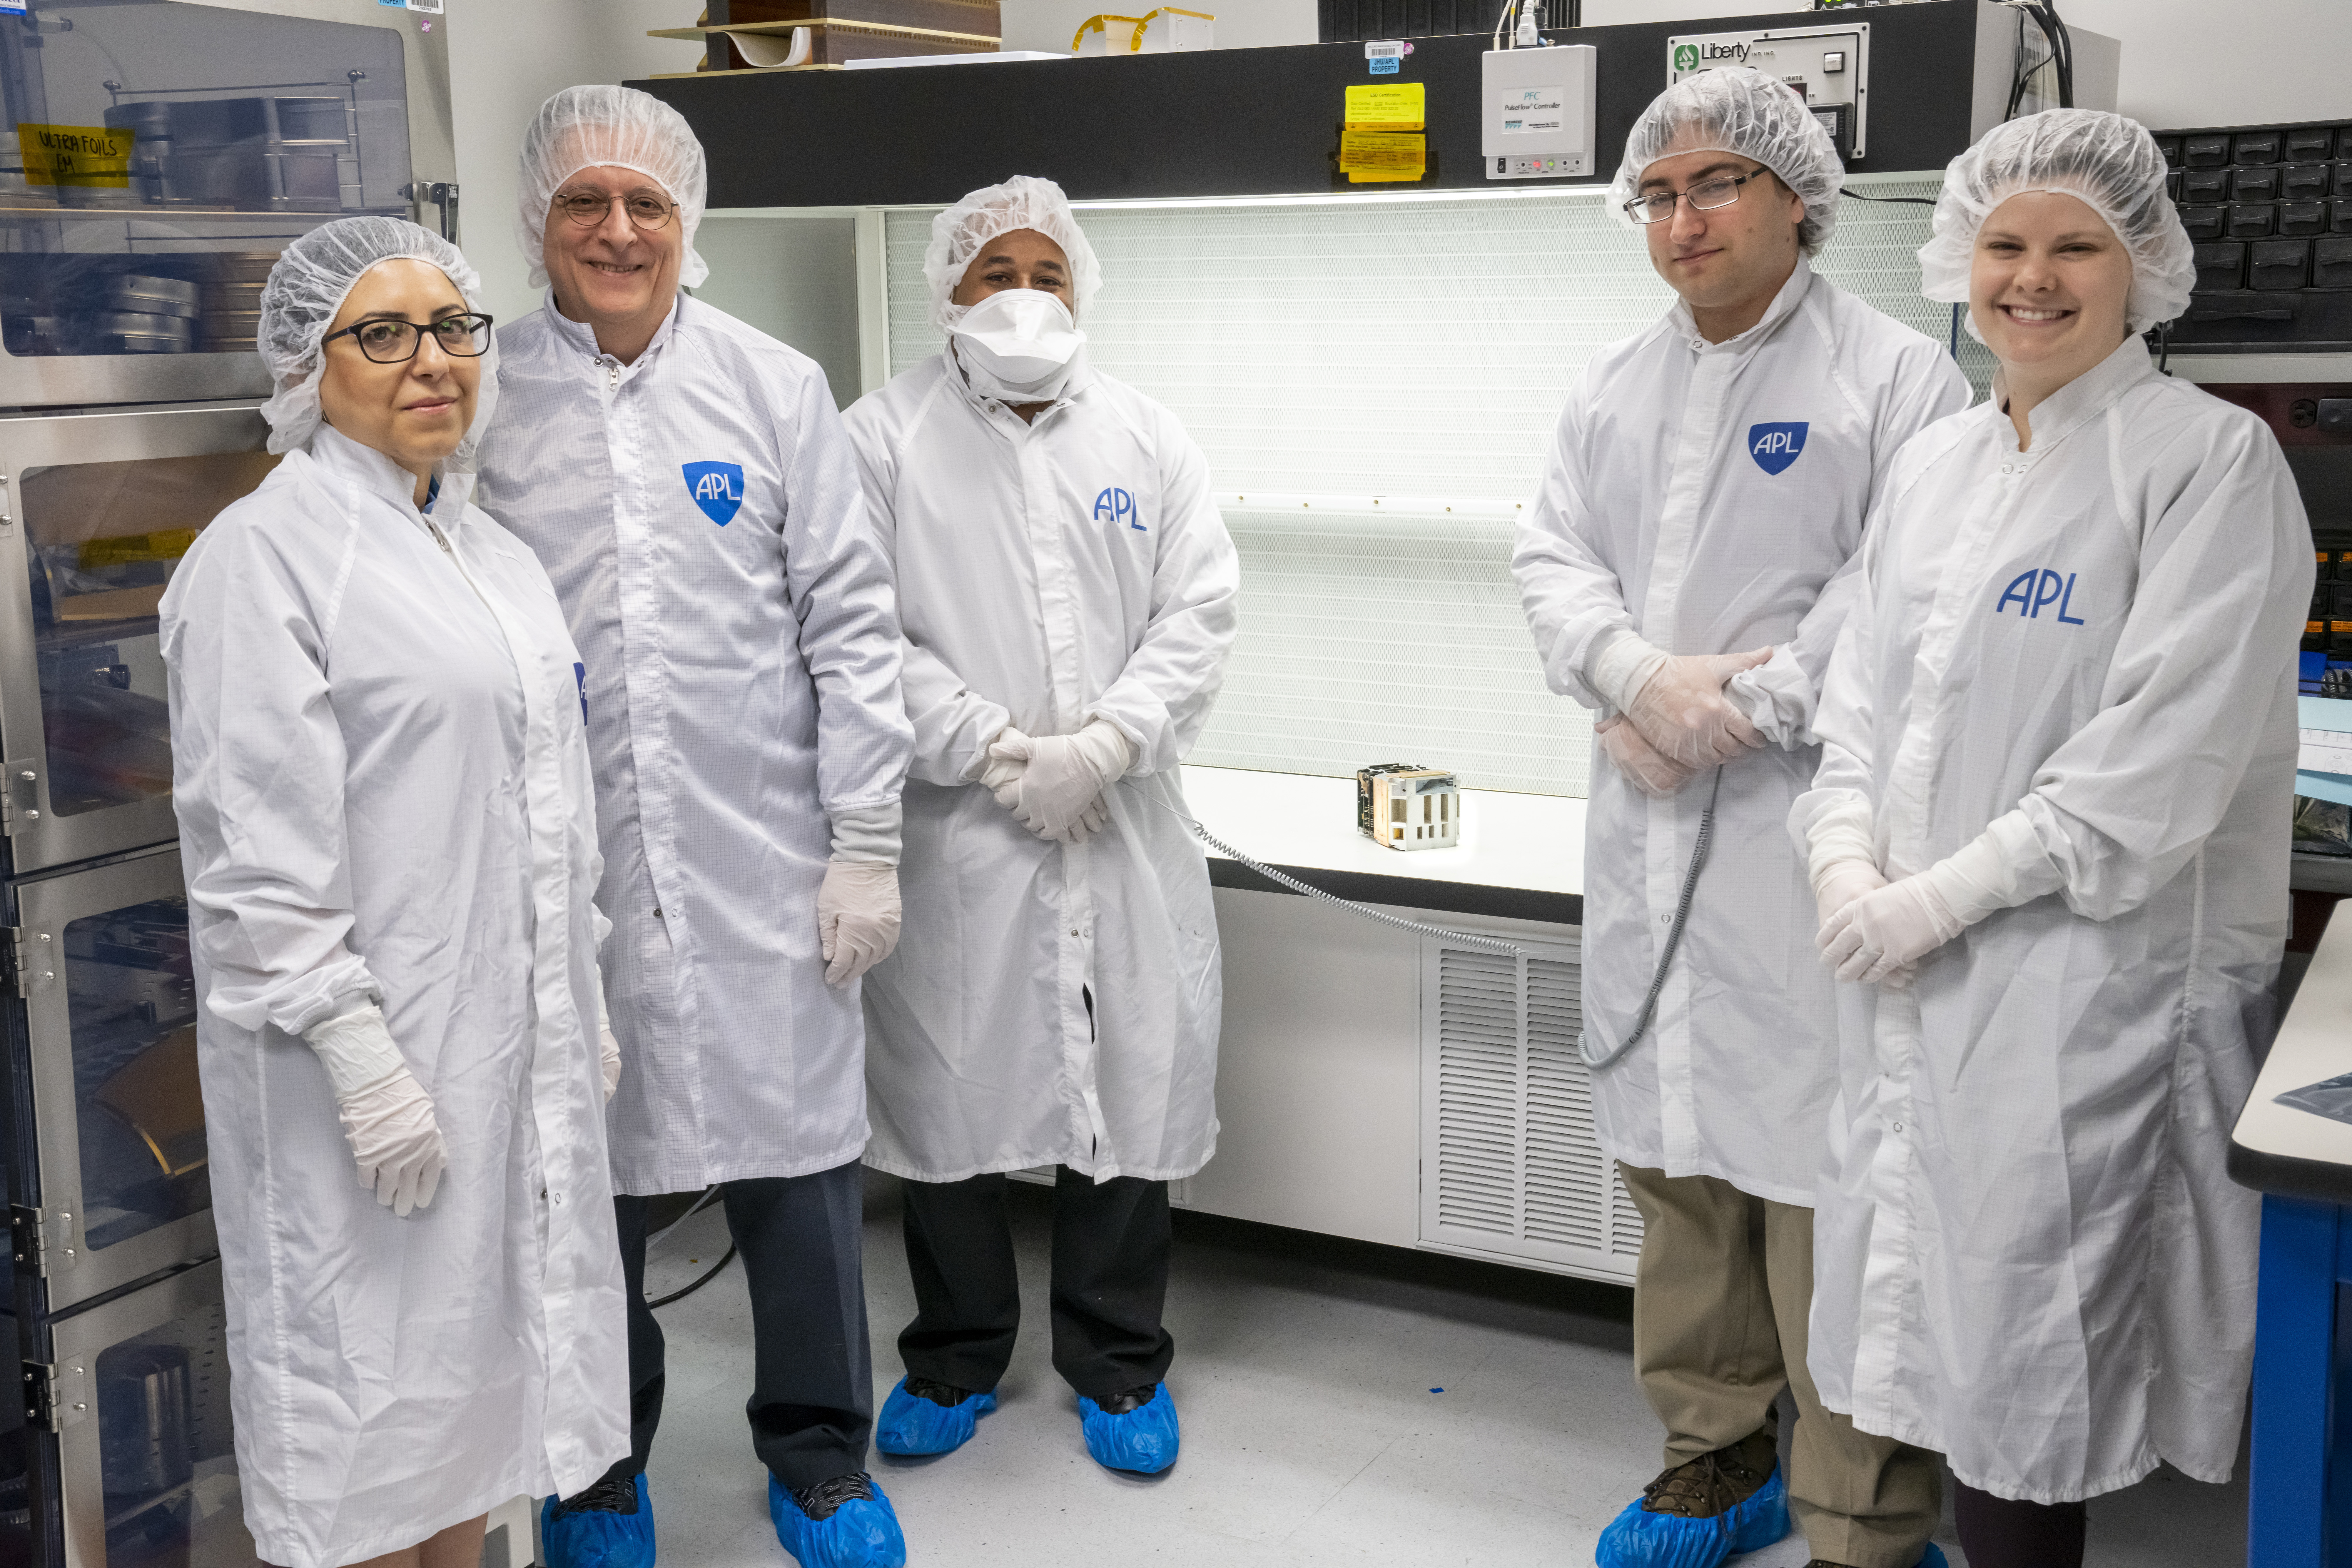 Five people wearing white hair nets, white masks, white gloves and white lab coats with the APL logo stand around a lab table with an electronics box on it